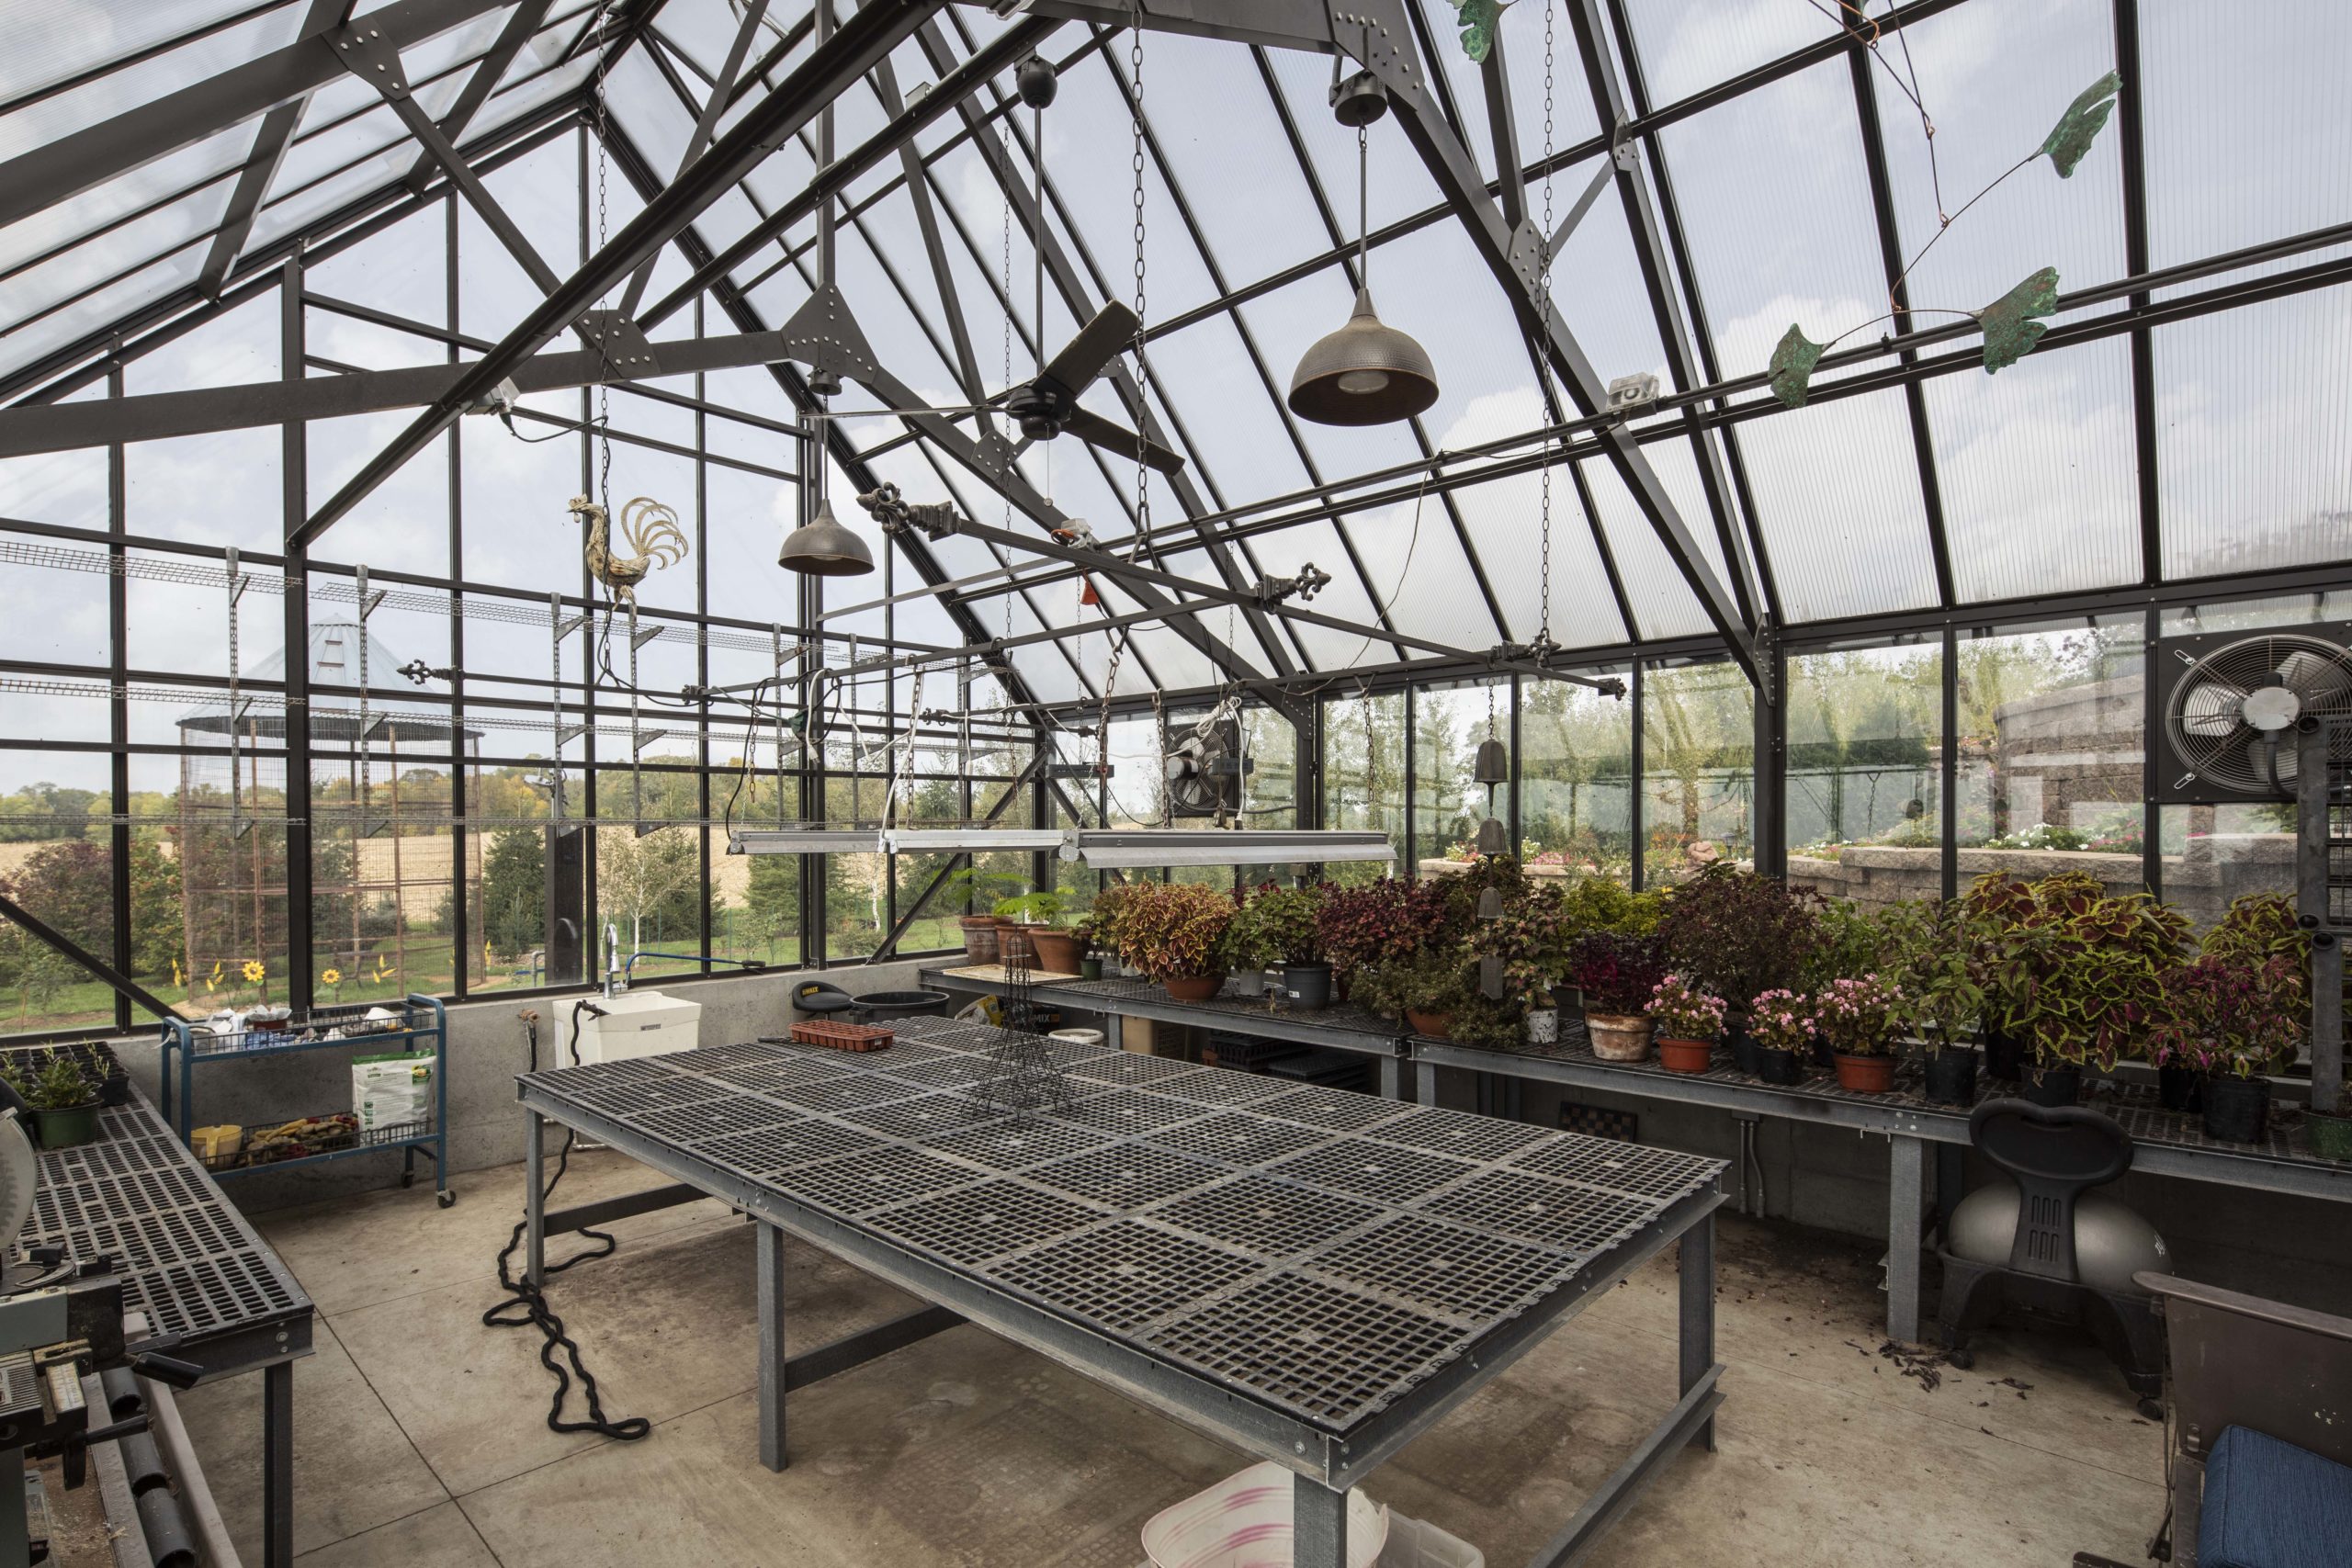 A prairie-style greenhouse, adorned with a variety of plants, features a table for display and cultivation.